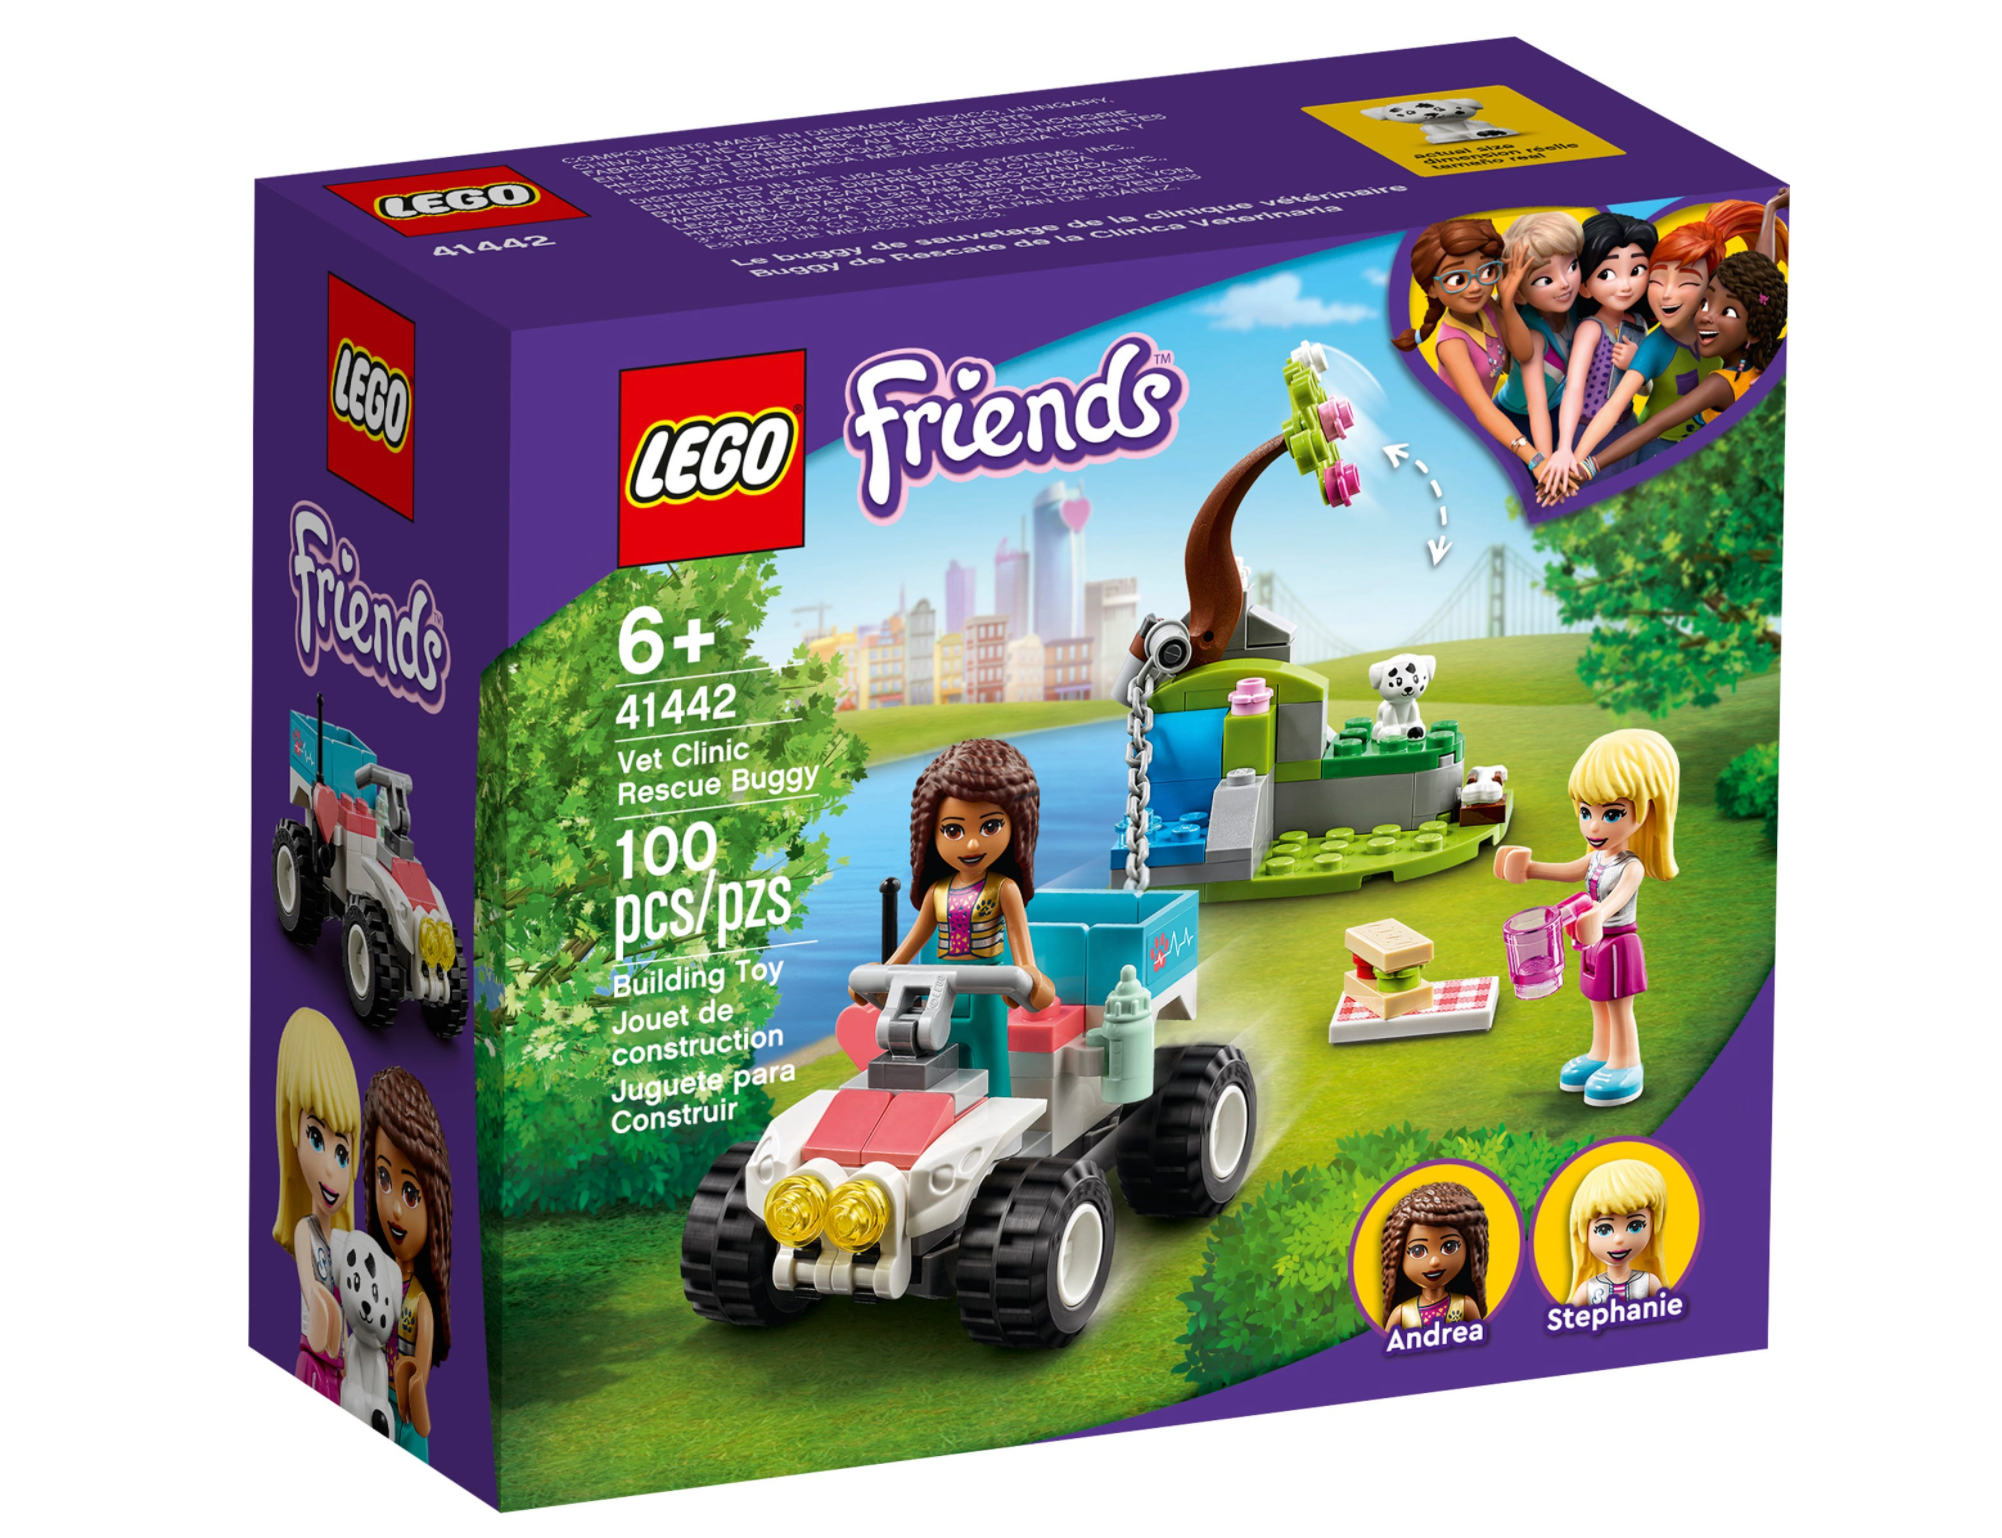 LEGO: Friends - Vet Clinic Rescue Buggy